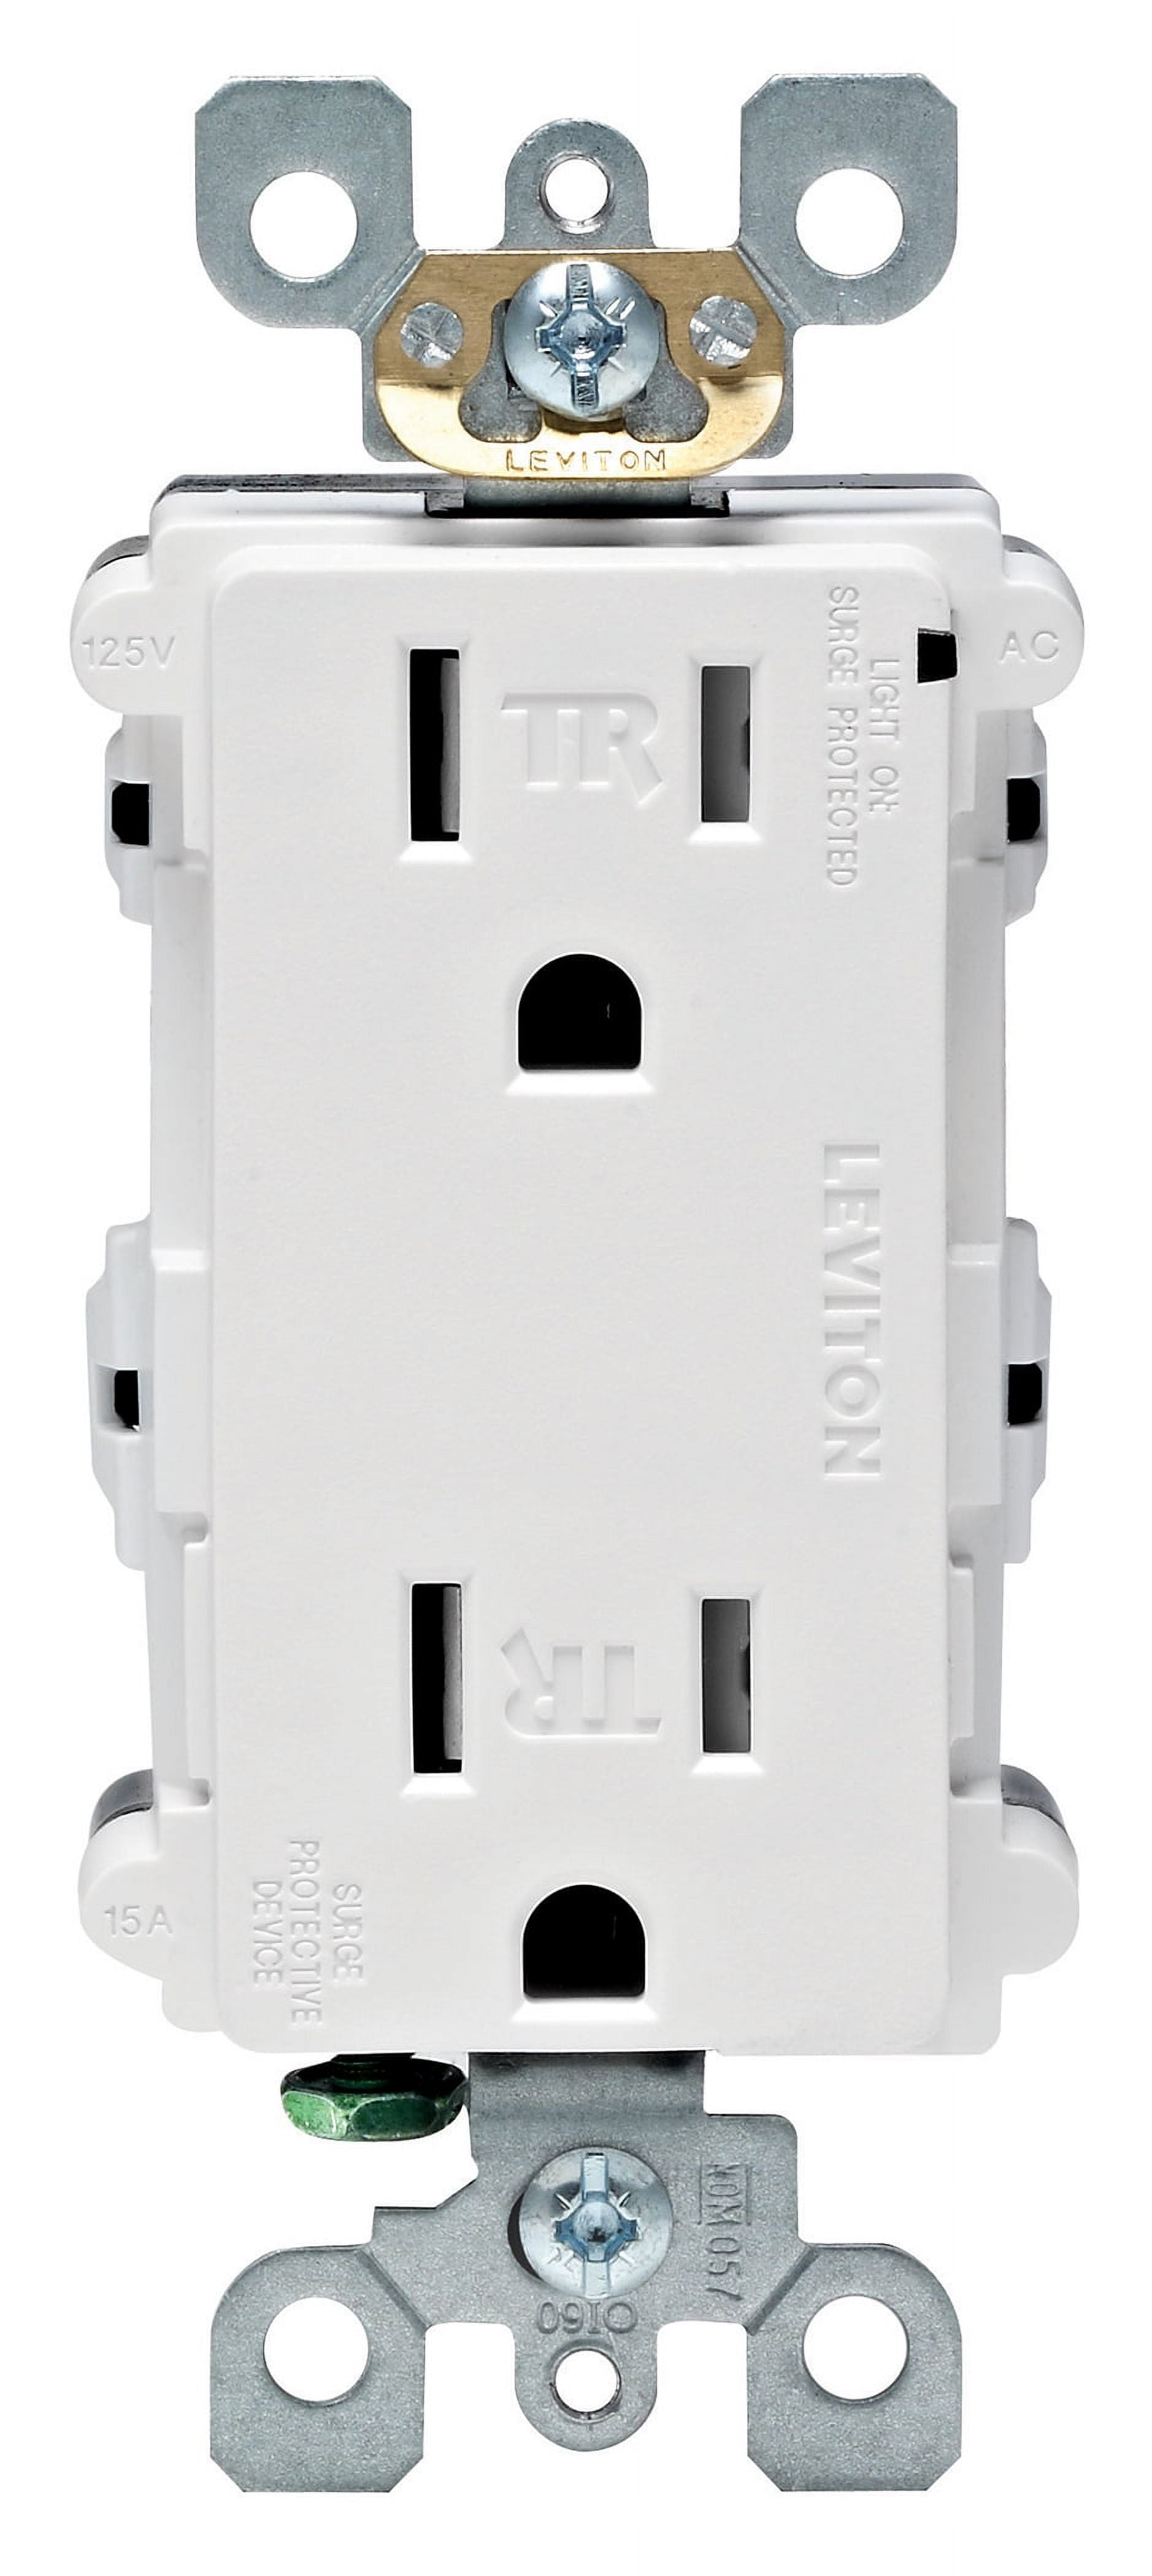 Leviton 2-Outlet White Socket with Pull Chain R52-01406-00W - The